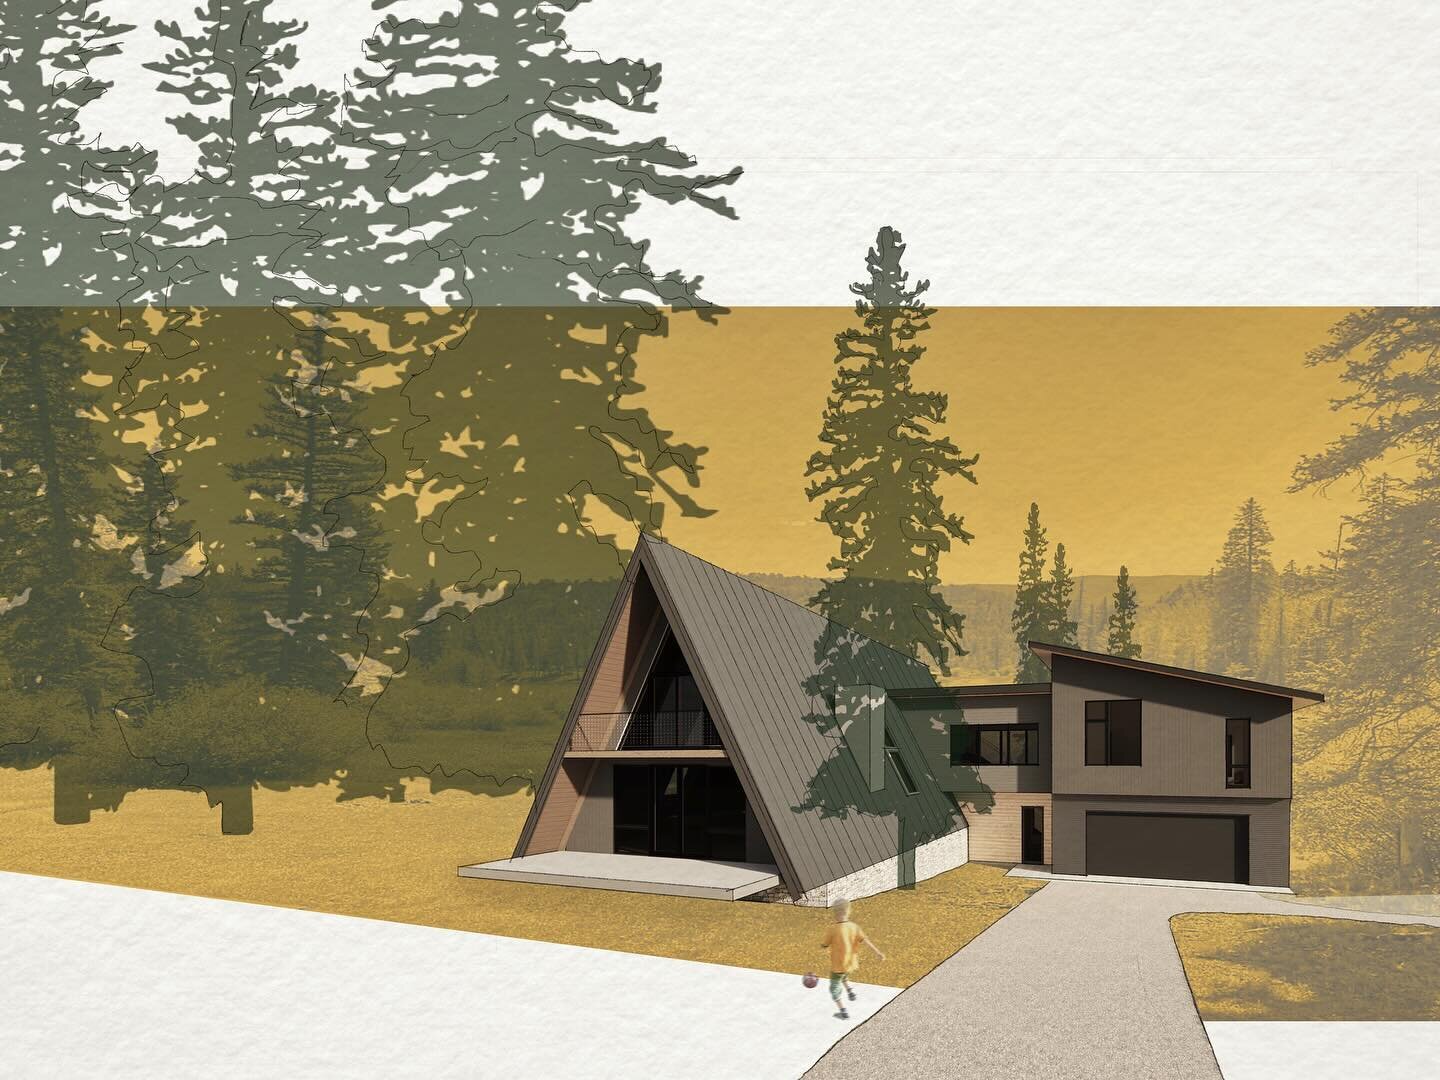 Williams A-Frame Progress. A humble addition to a 70&rsquo;s kit-built A-frame in North county 

#thisisMESA

#mesarchitecture #durangocolorado #coloradoarchitecture #durangoarchitects #aframe #procreate #enscape3d